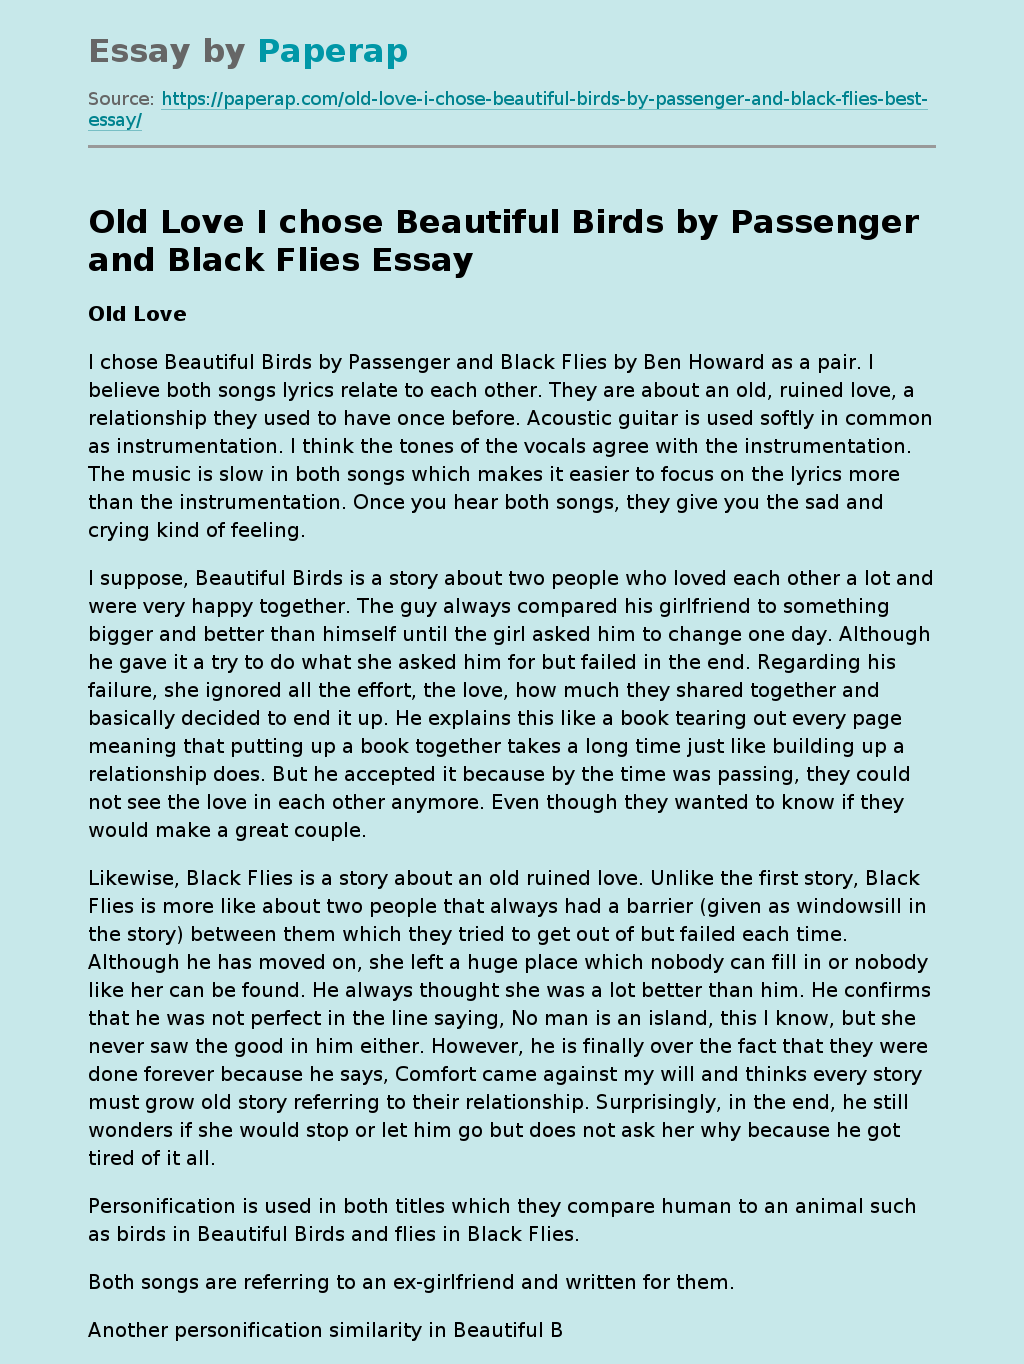 Old Love I chose Beautiful Birds by Passenger and Black Flies